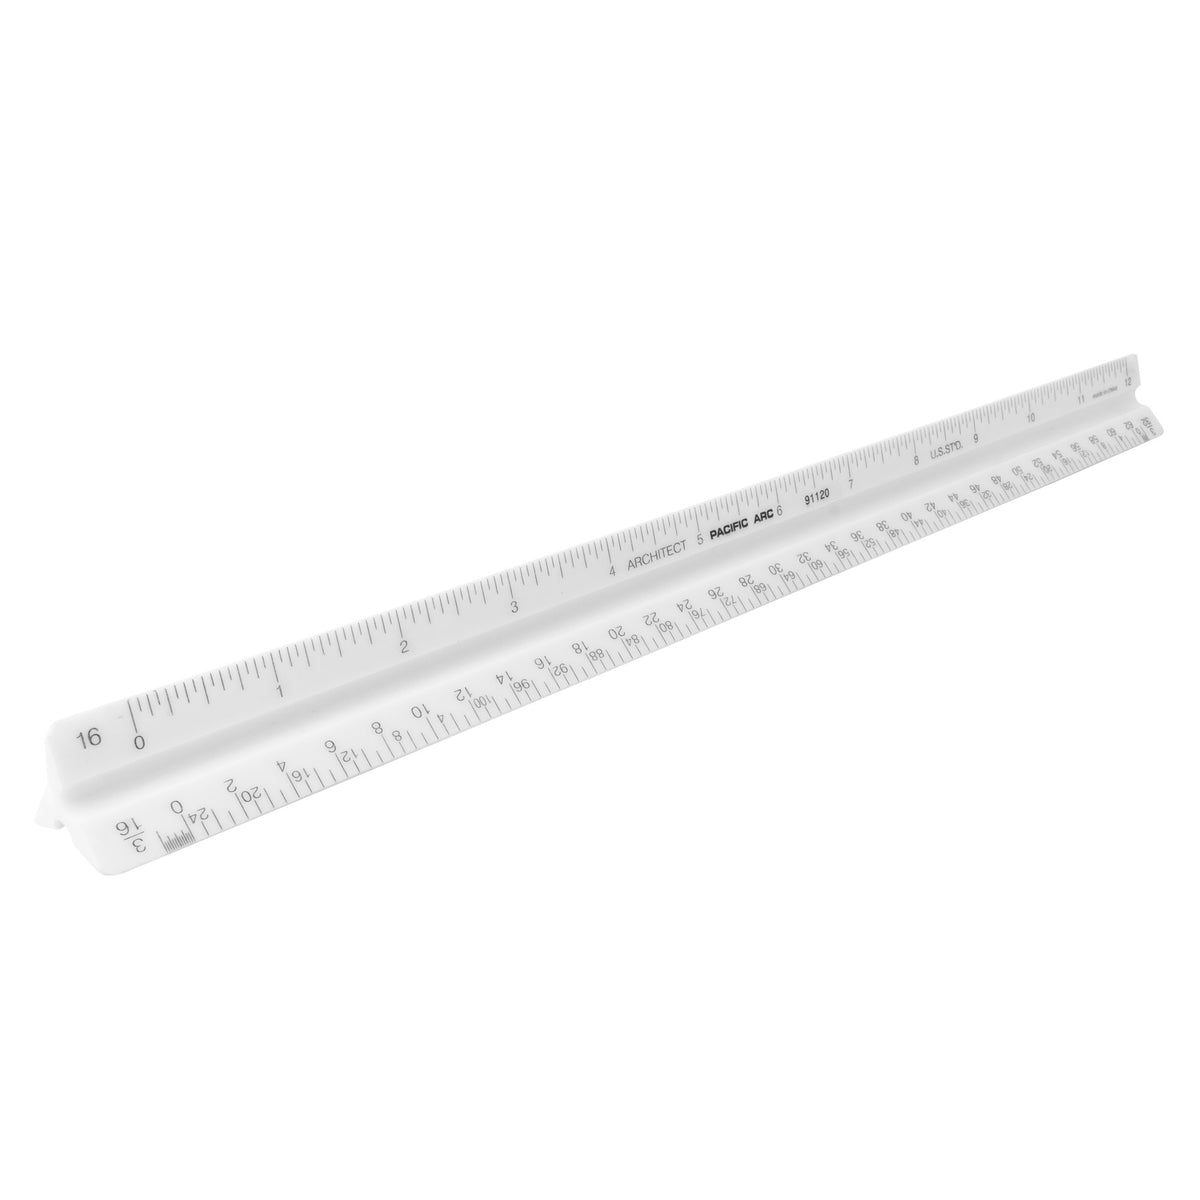 Pacific Arc ME15 Stainless Steel Nonslip Ruler inch / Metric 15 inch